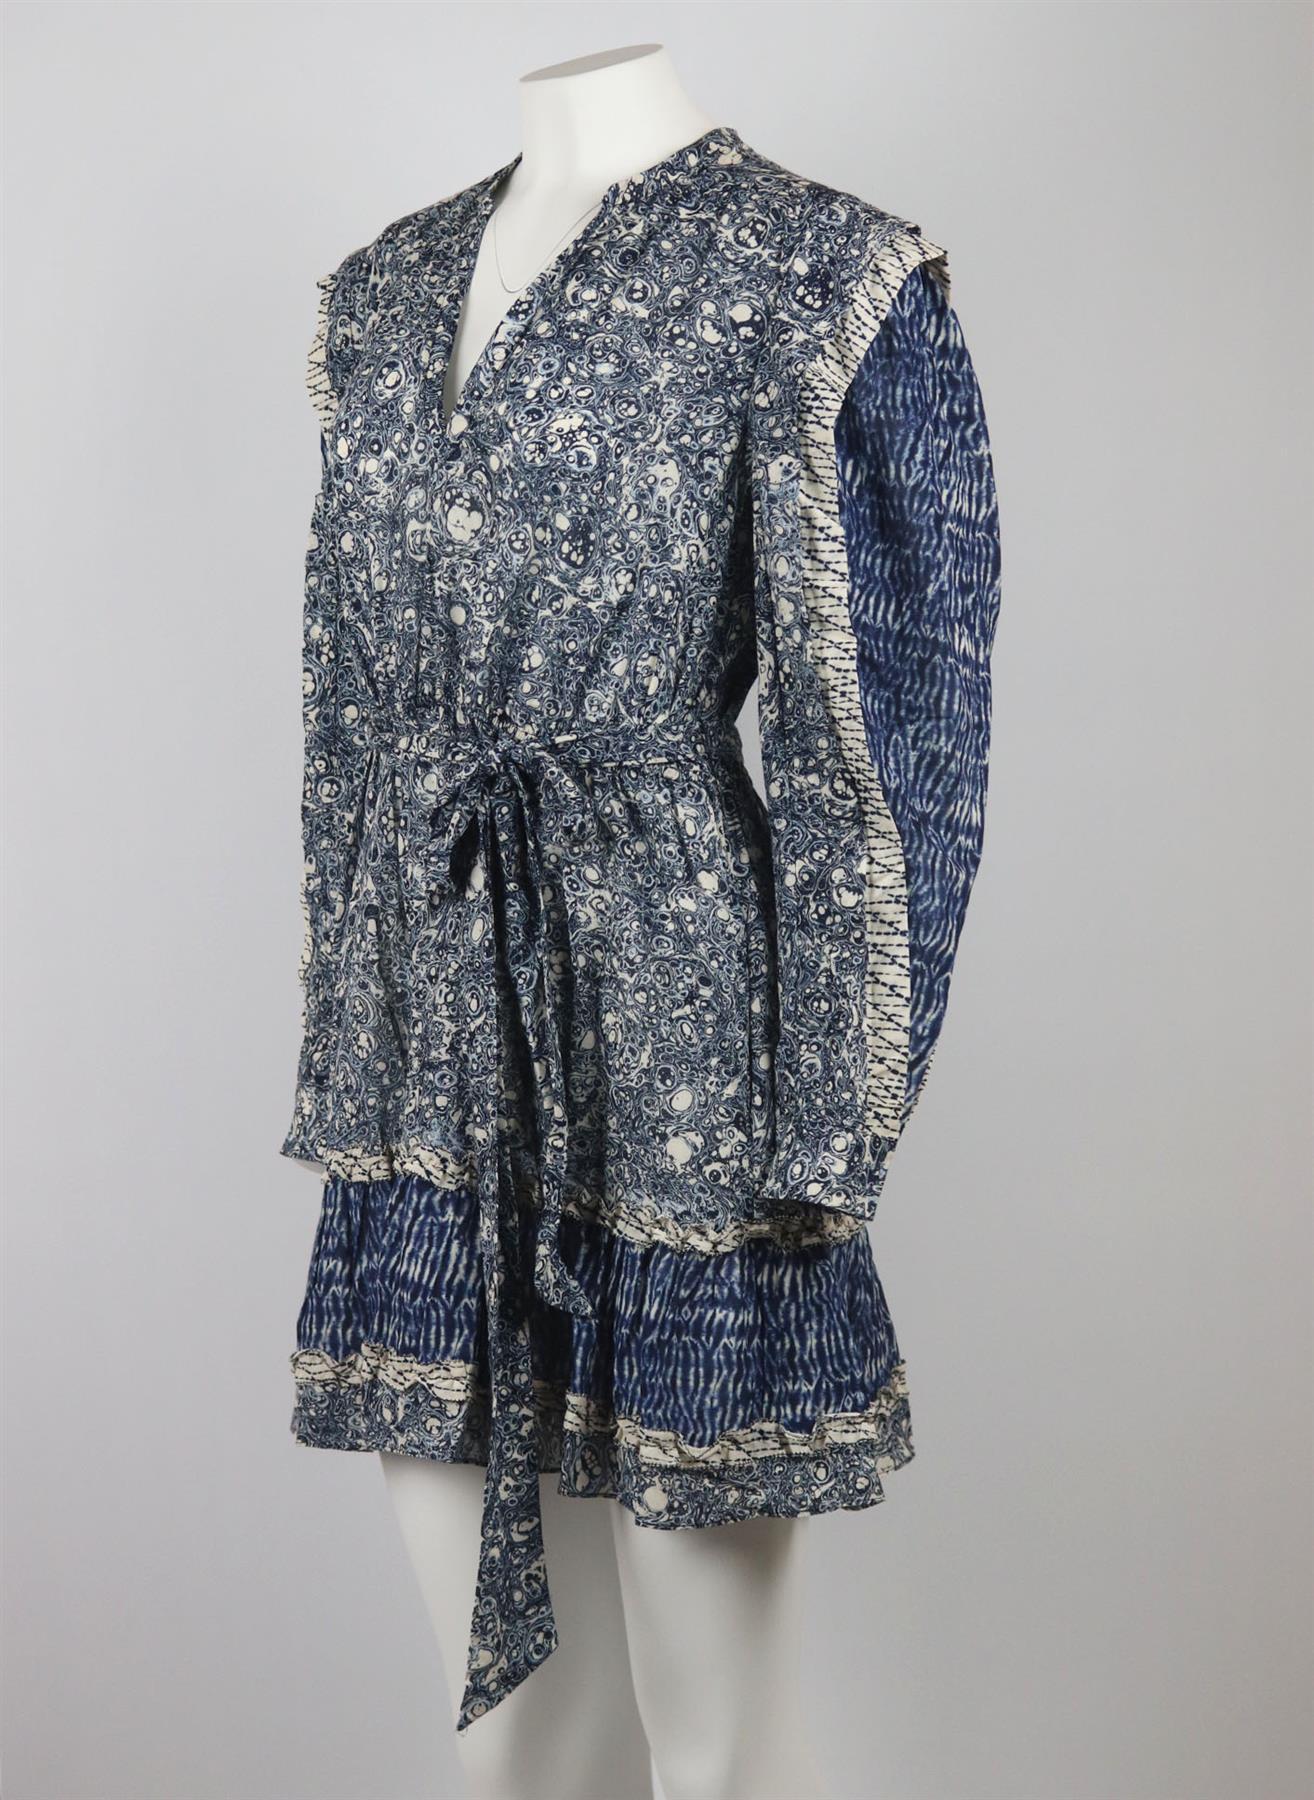 Ulla Johnson has mastered the art of bohemian dressing, this 'Noumi' dress is made from lightweight cotton-blend voile, it's printed with a patchwork of prints and has a belted waist and ruffled trims that add to the feminine feel. Tonal-blue and